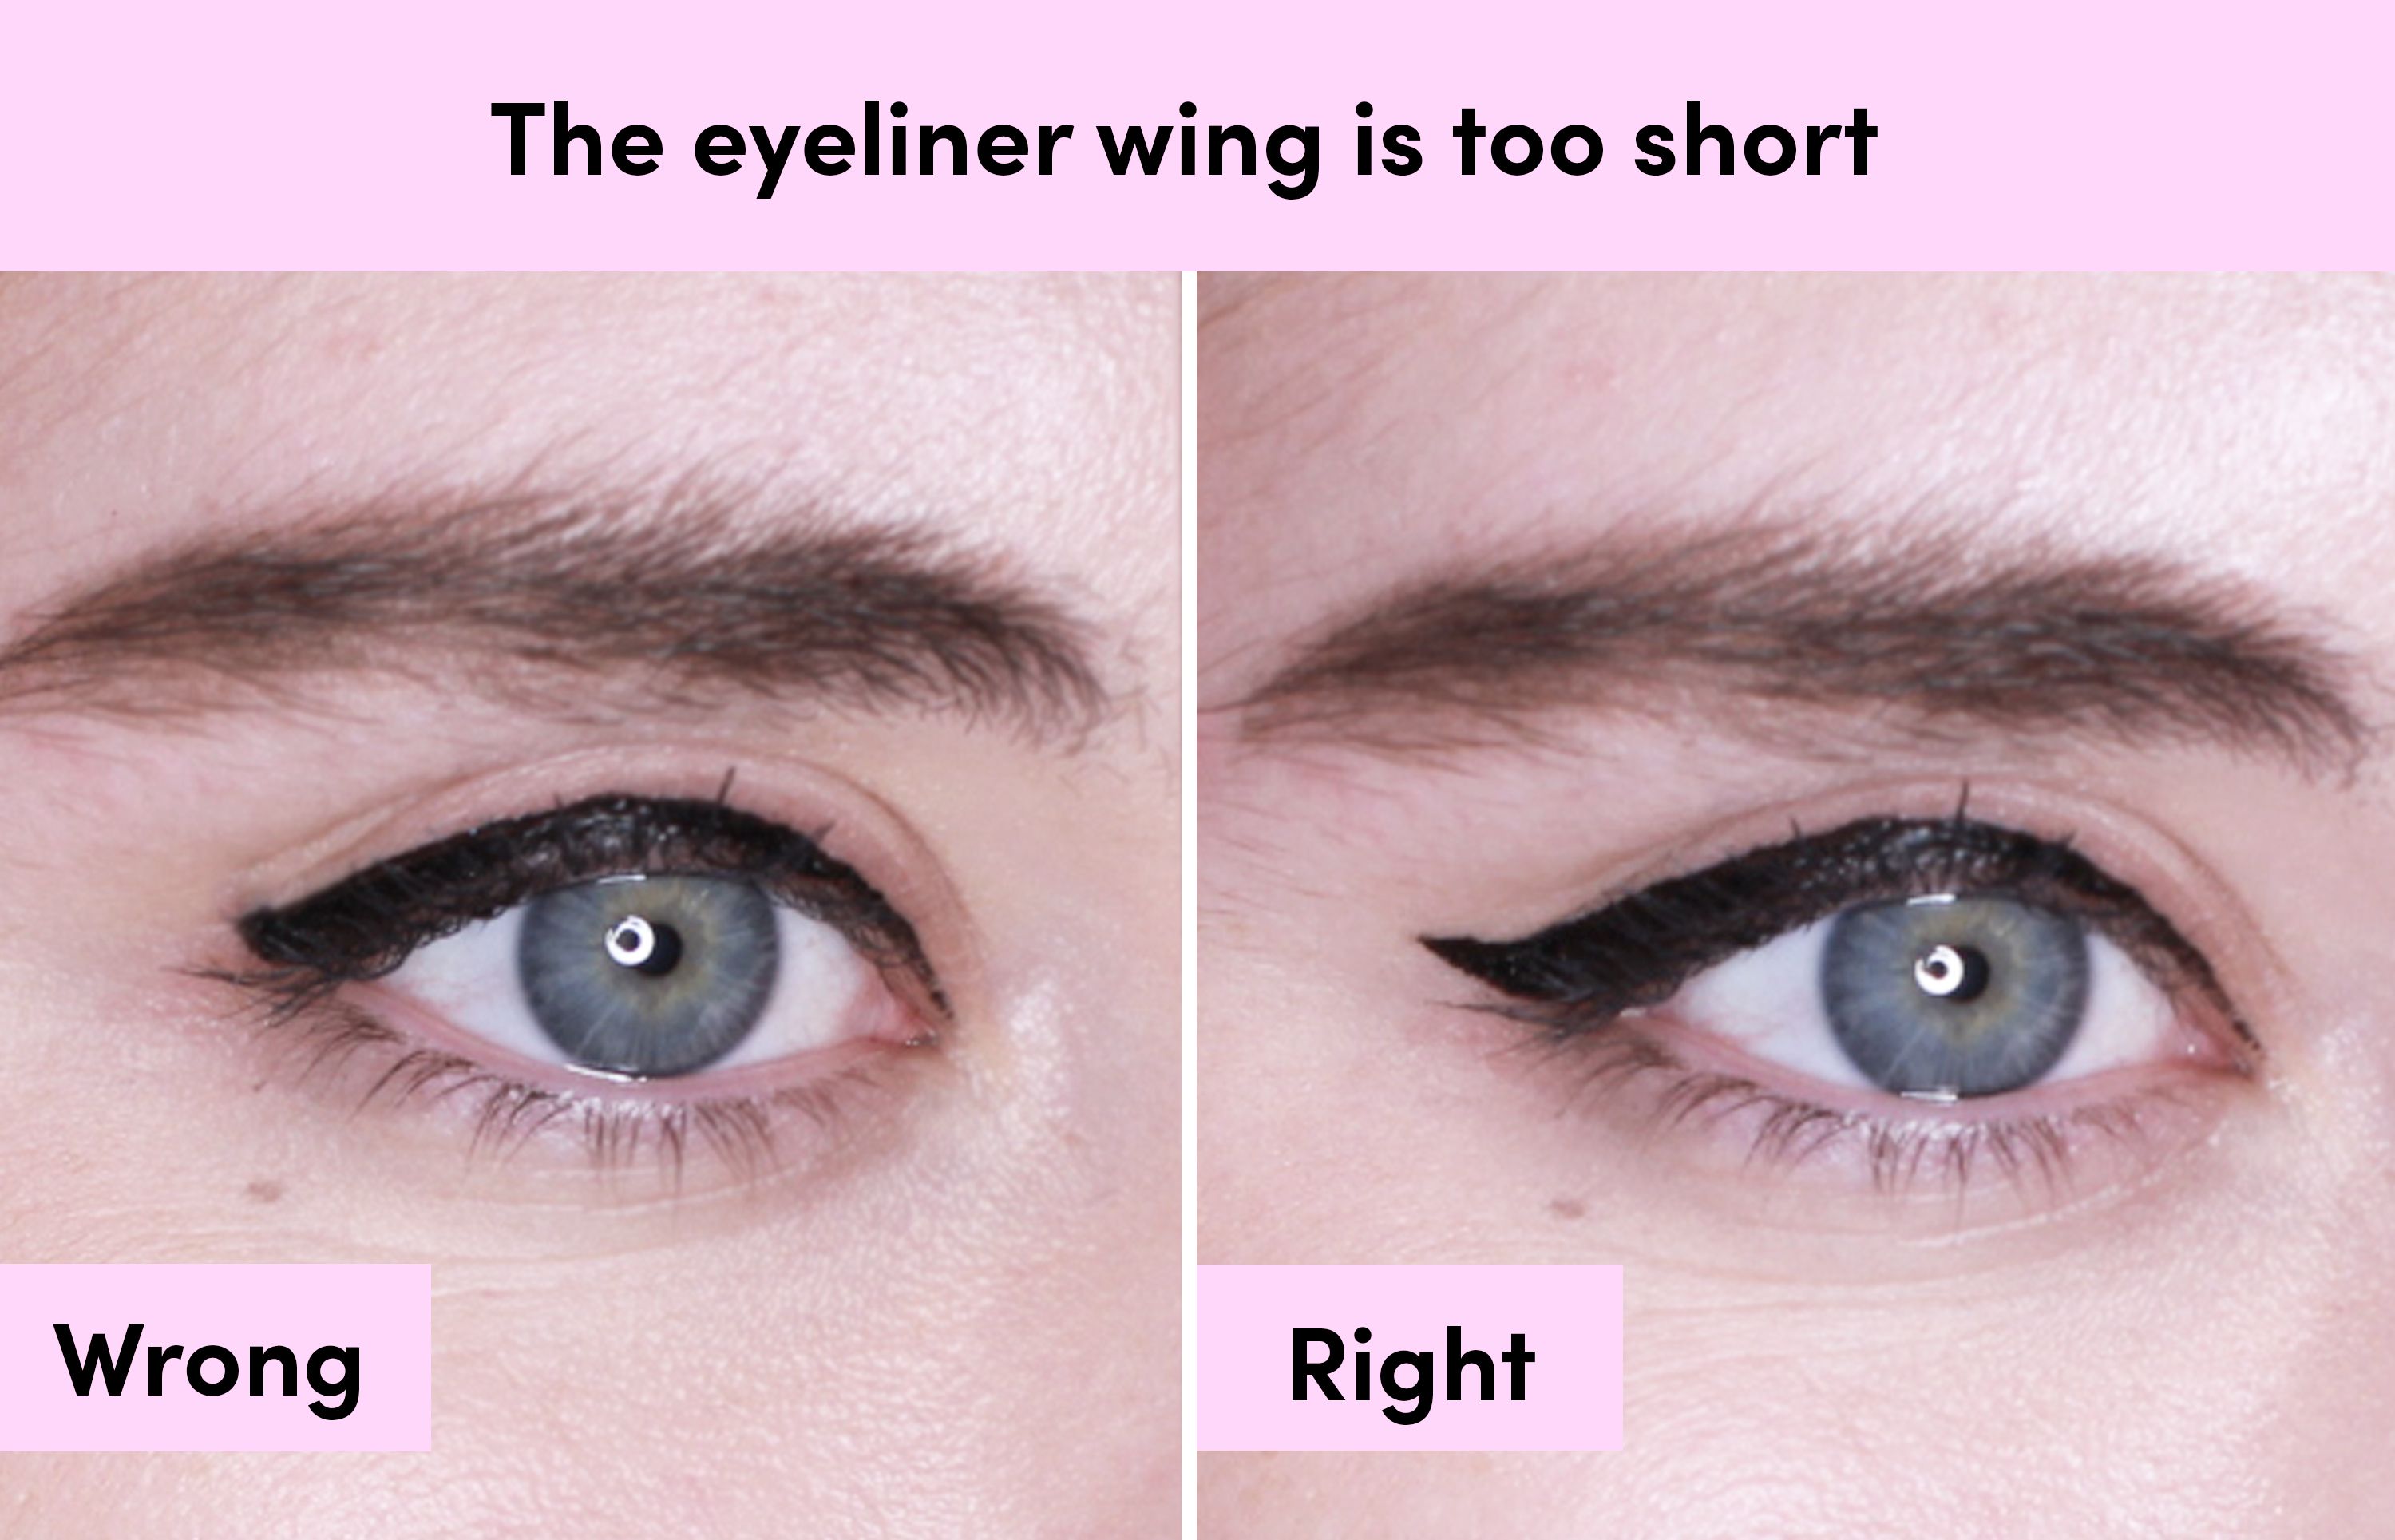 Polar Start have How to apply liquid eyeliner - 7 mistakes to avoid making